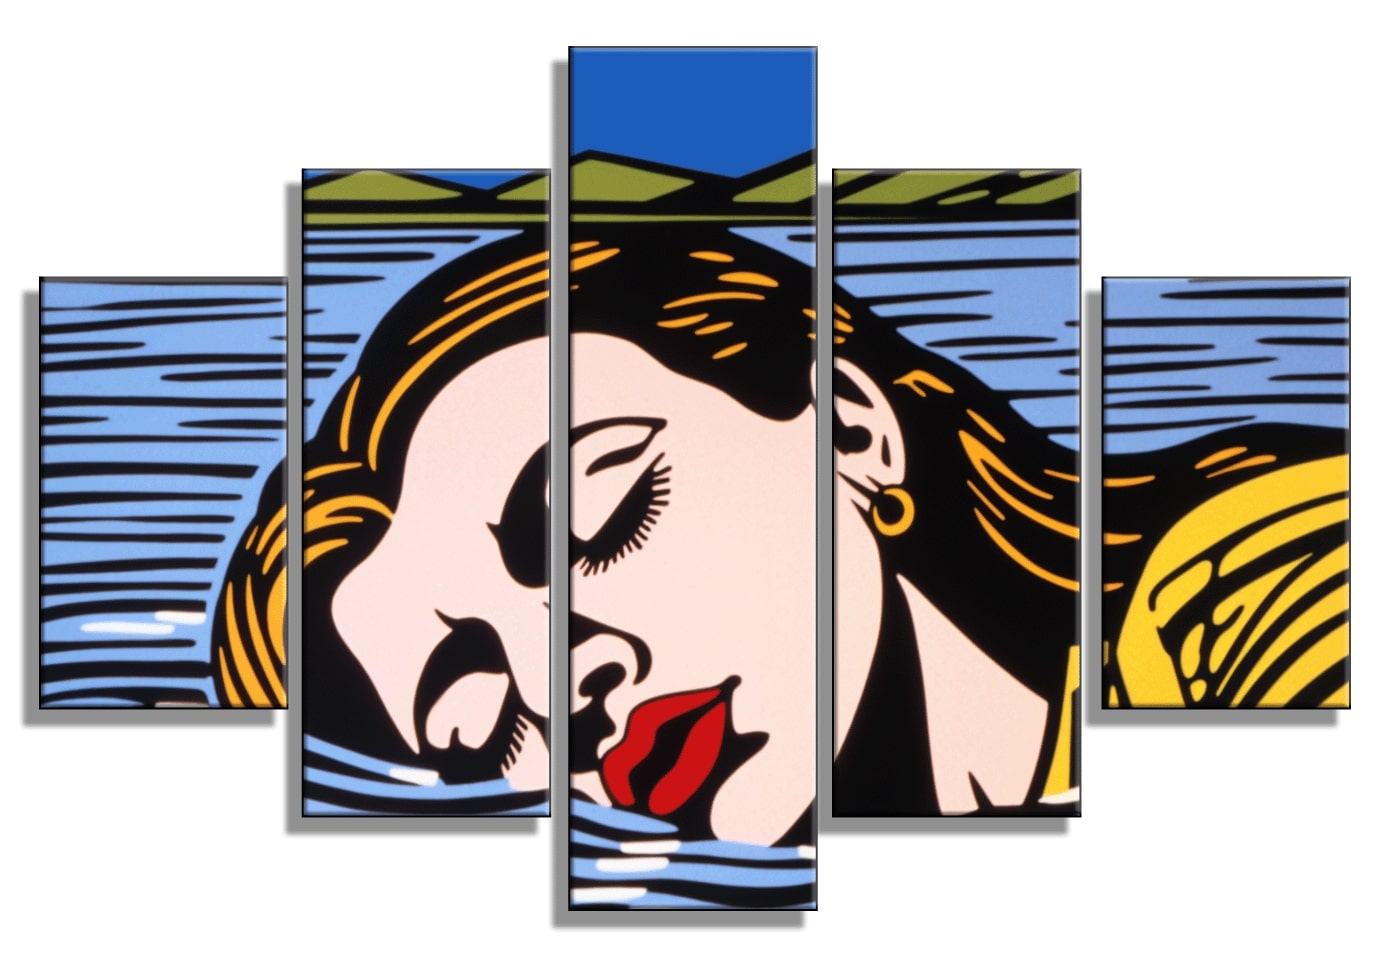 Multi-Panel Drowning Girl in the Nile River Pop Art Painting - 40x60 inches